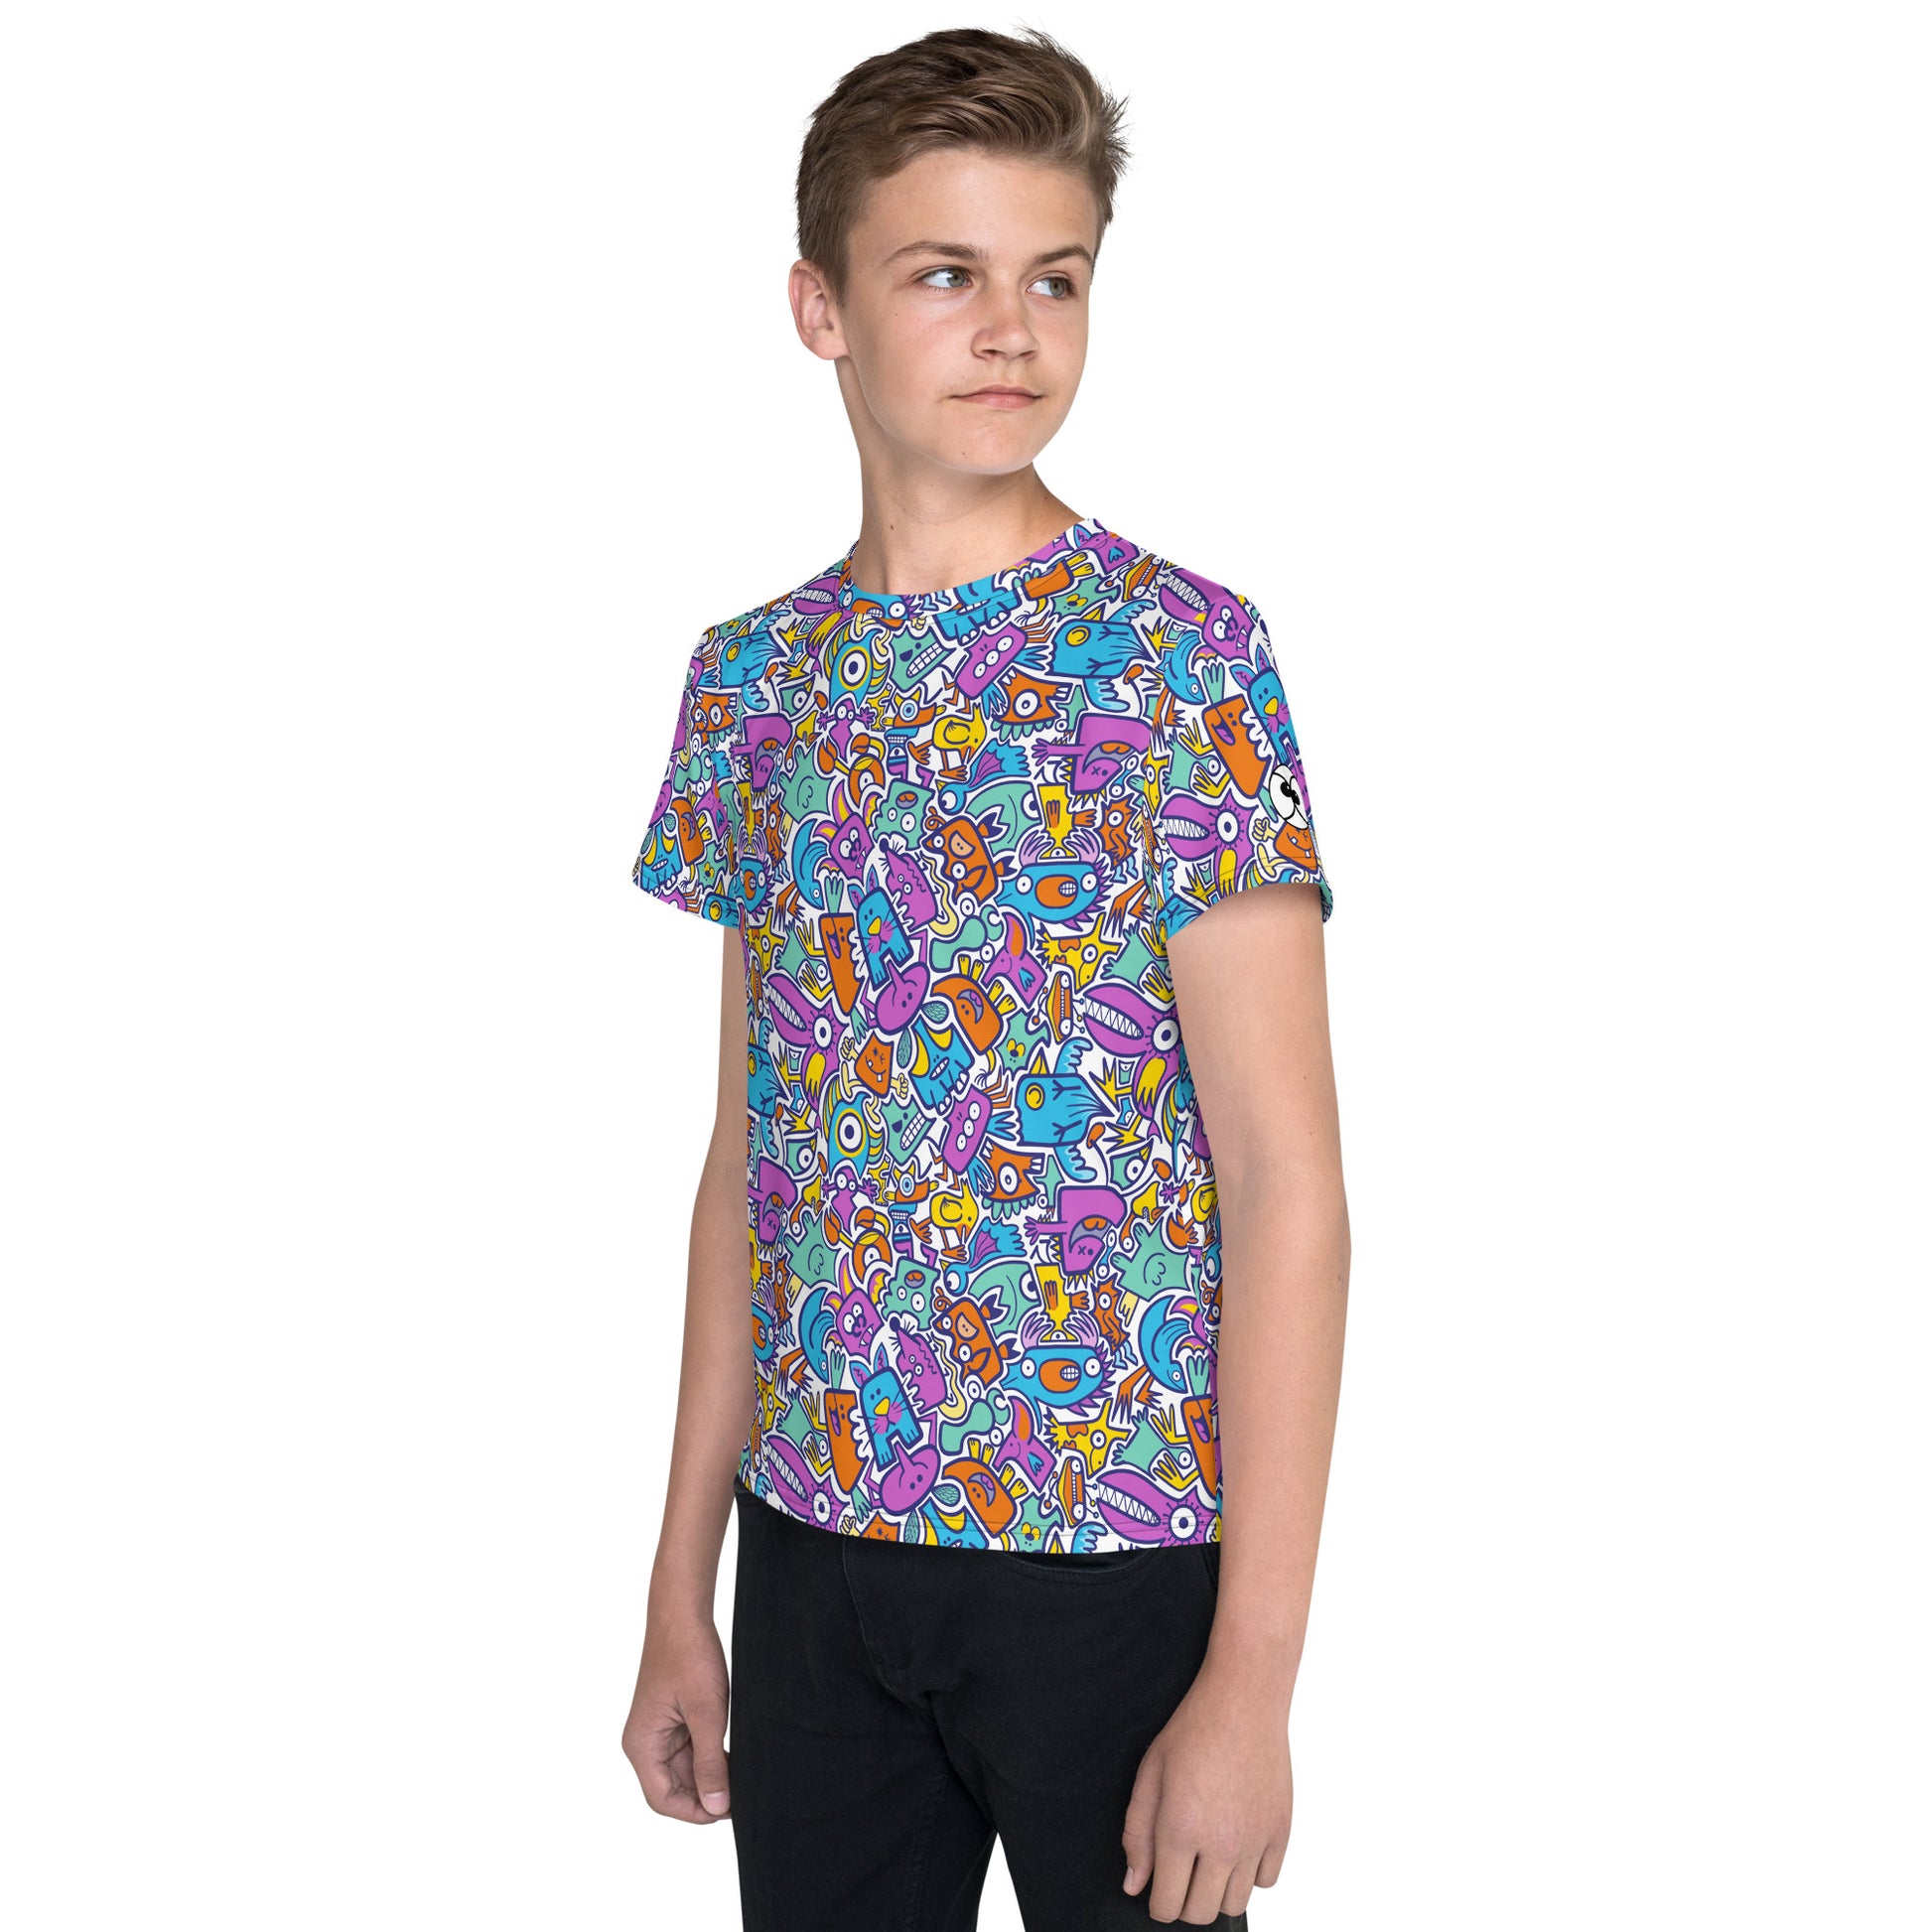 Young boy wearing Youth crew neck t-shirt All-over printed with Funny multicolor doodle world